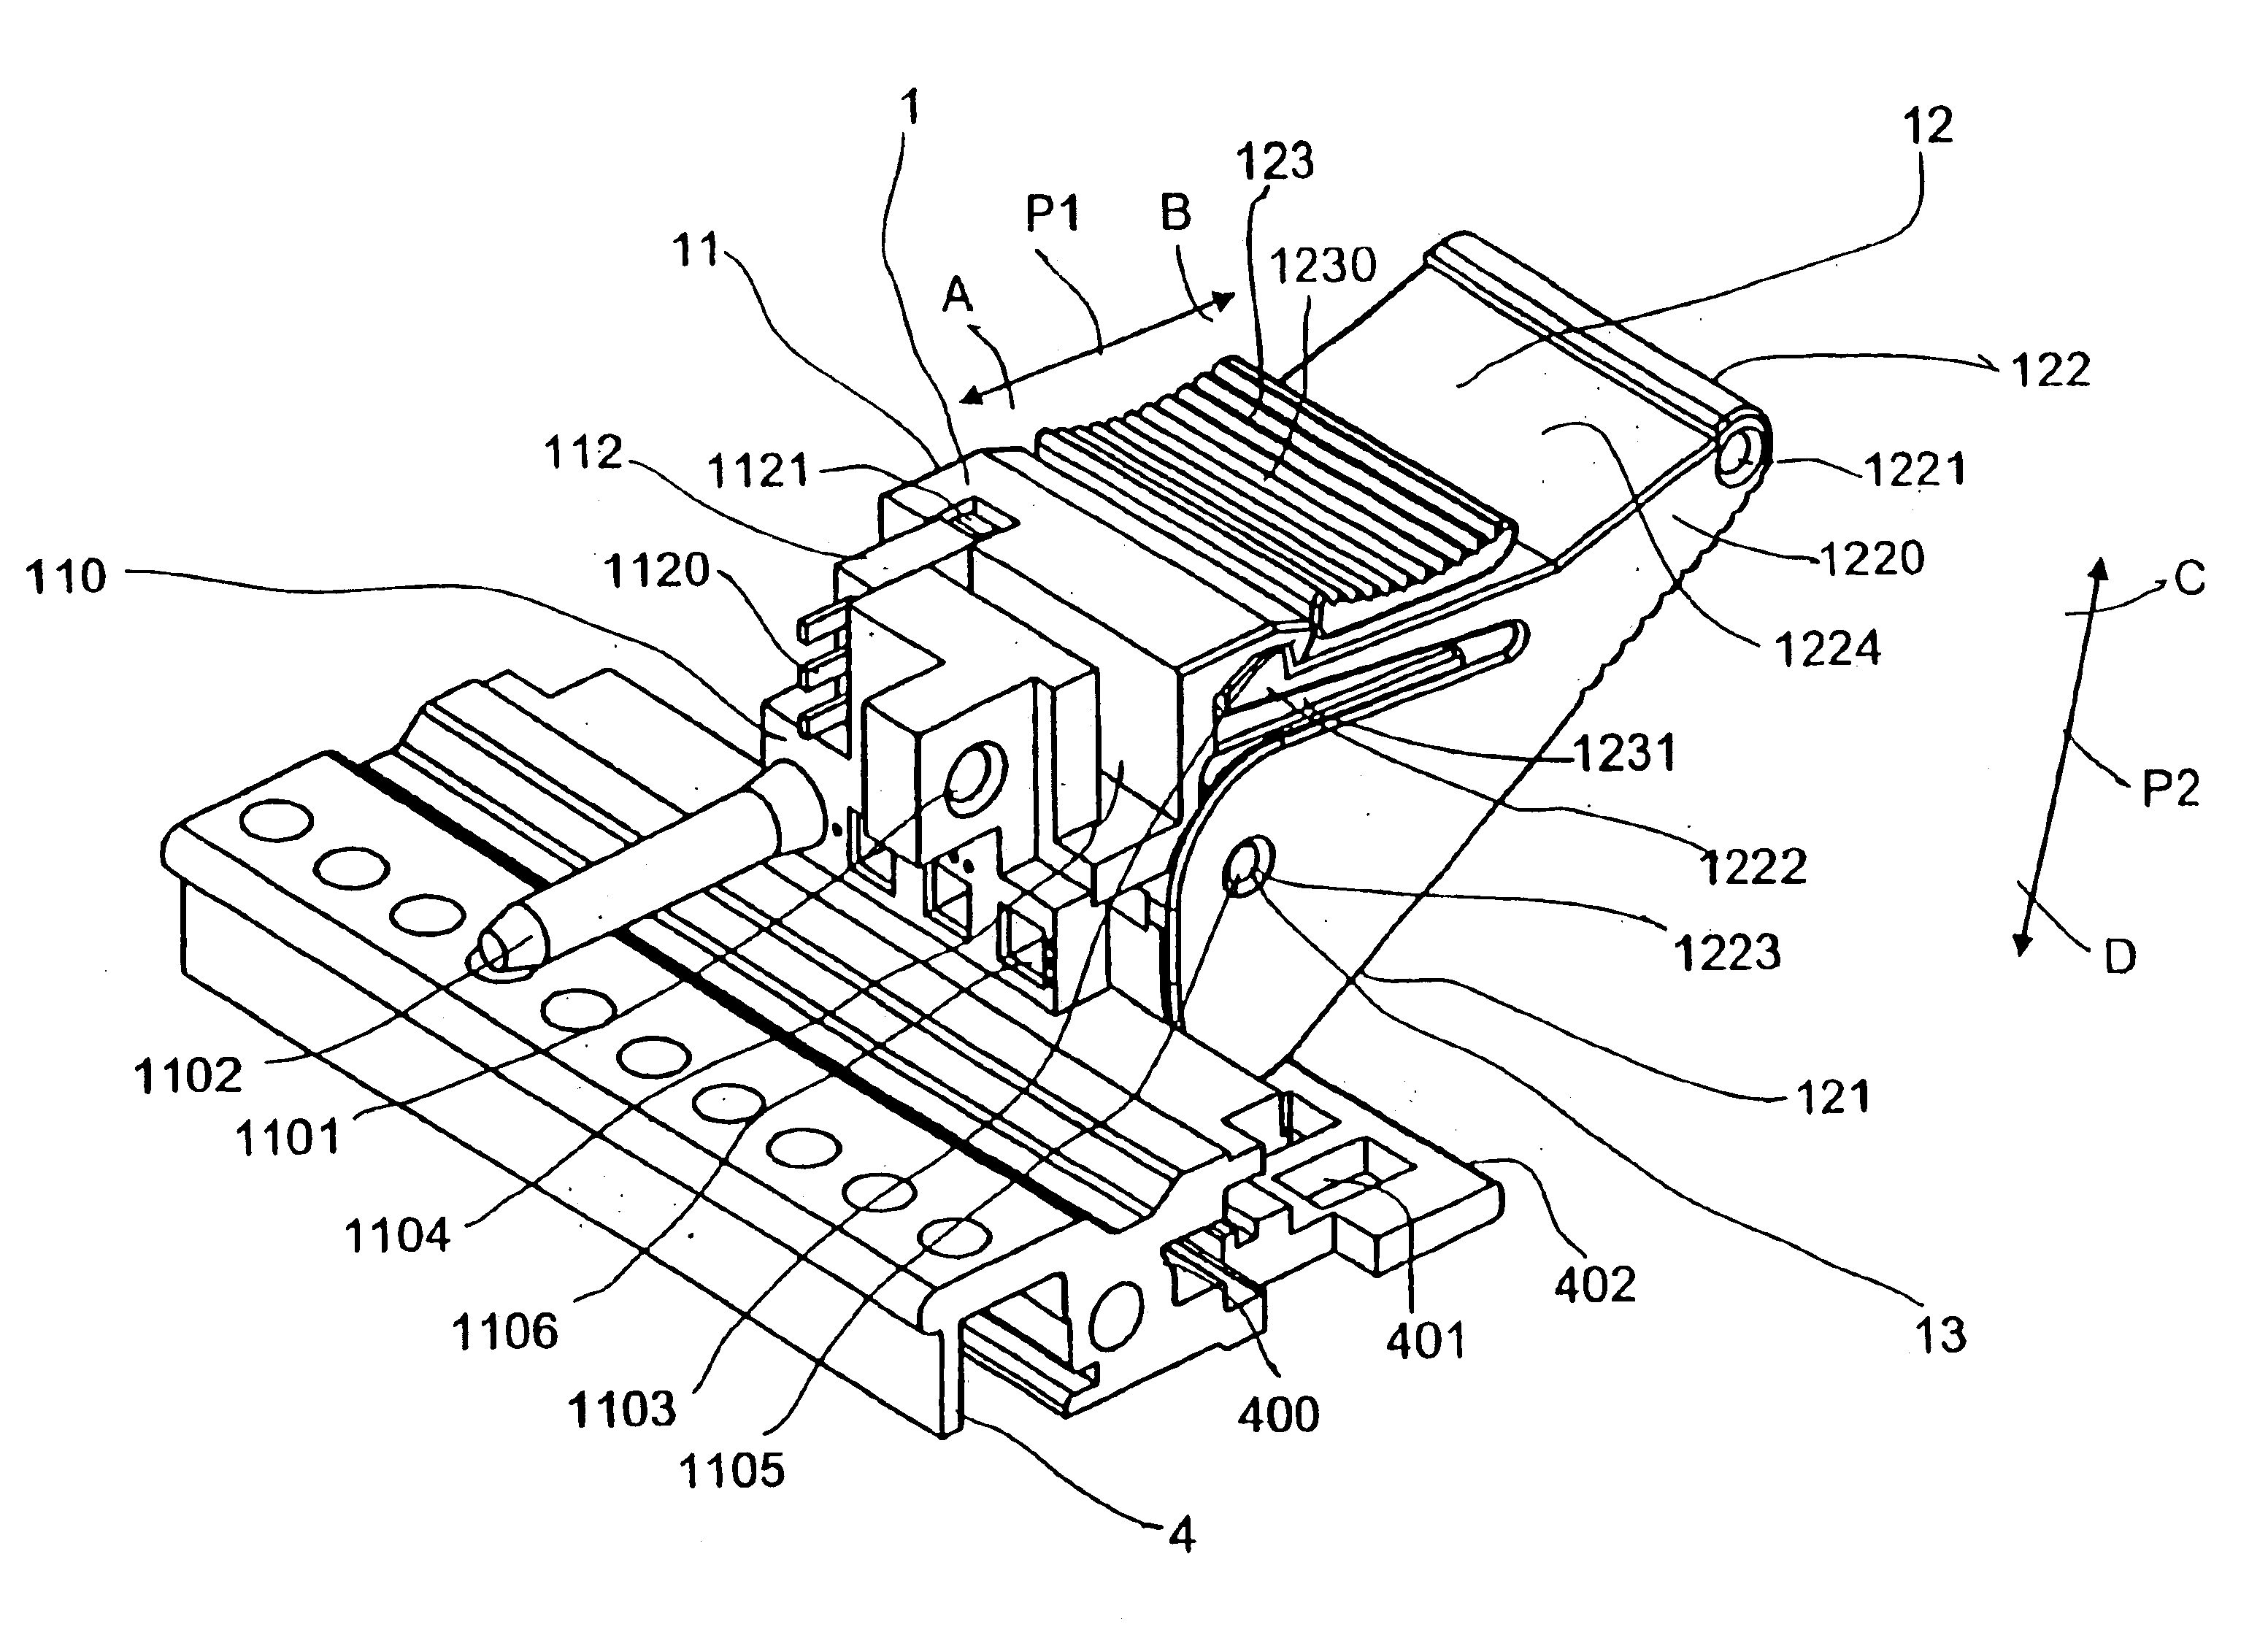 Actuator element for levering in and out printed circuit modules with locking slide, front element for a printed circuit module with actuator element, and subrack that receives printed circuit modules